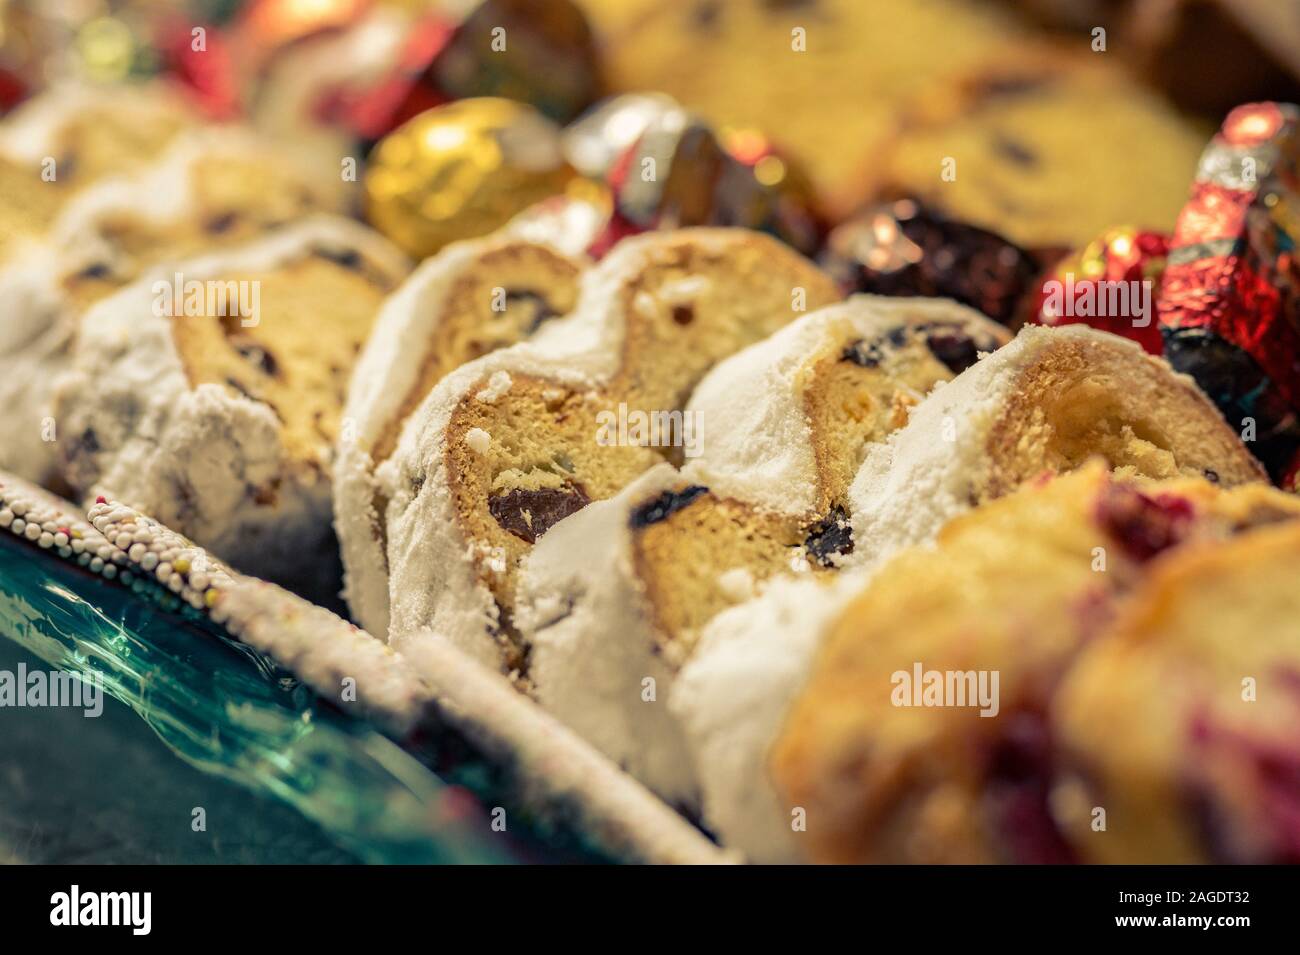 German Christmas stollen with cookies and treats for a holiday tray. Stock Photo